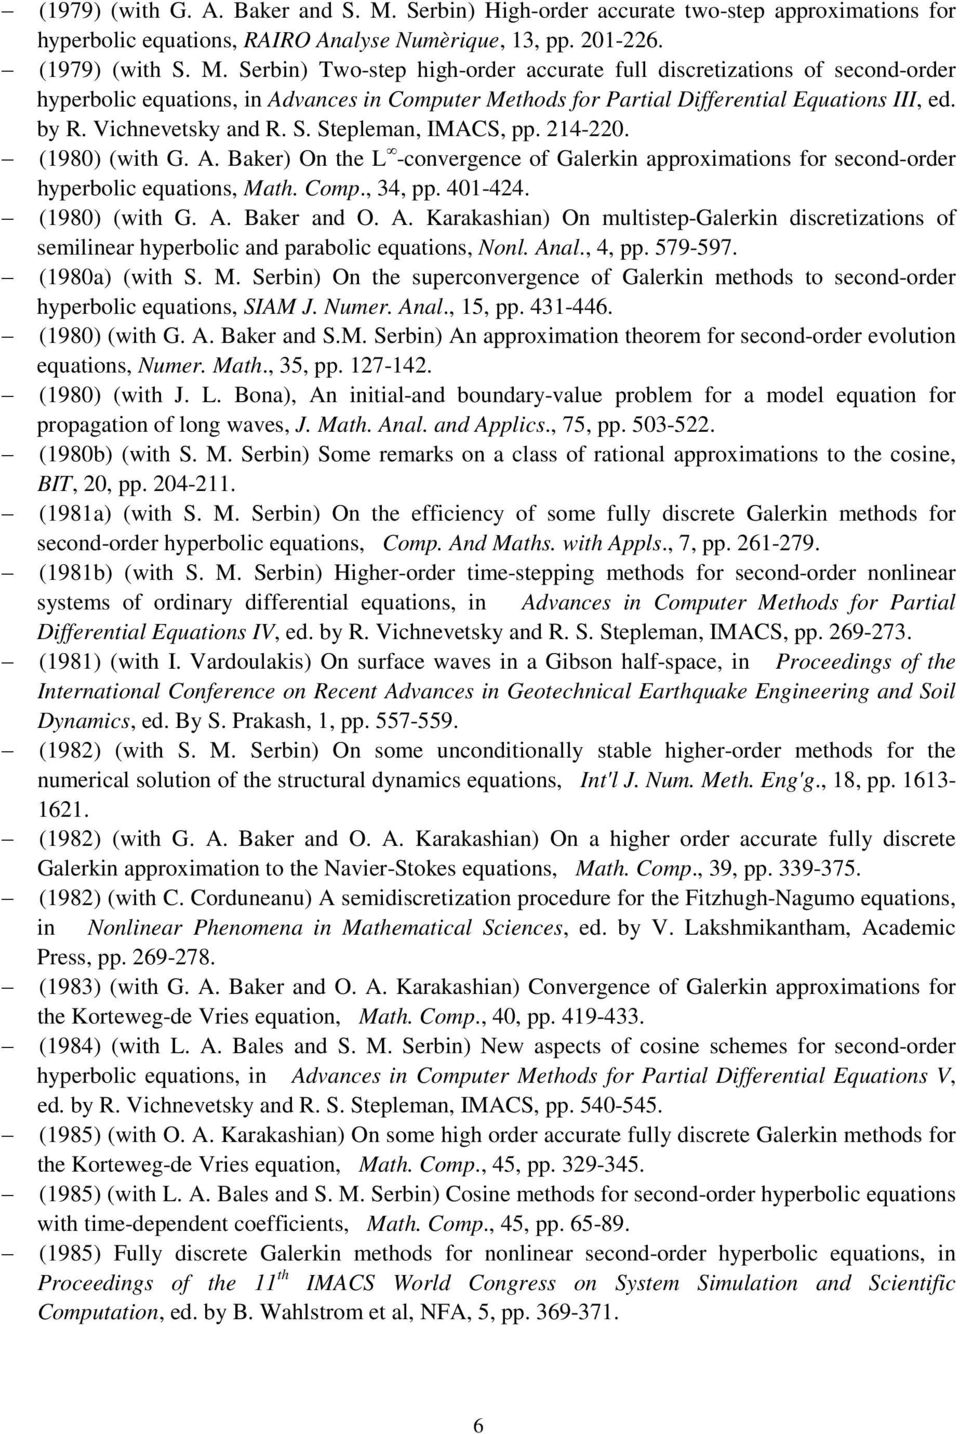 Serbin) Two-step high-order accurate full discretizations of second-order hyperbolic equations, in Advances in Computer Methods for Partial Differential Equations III, ed. by R. Vichnevetsky and R. S.